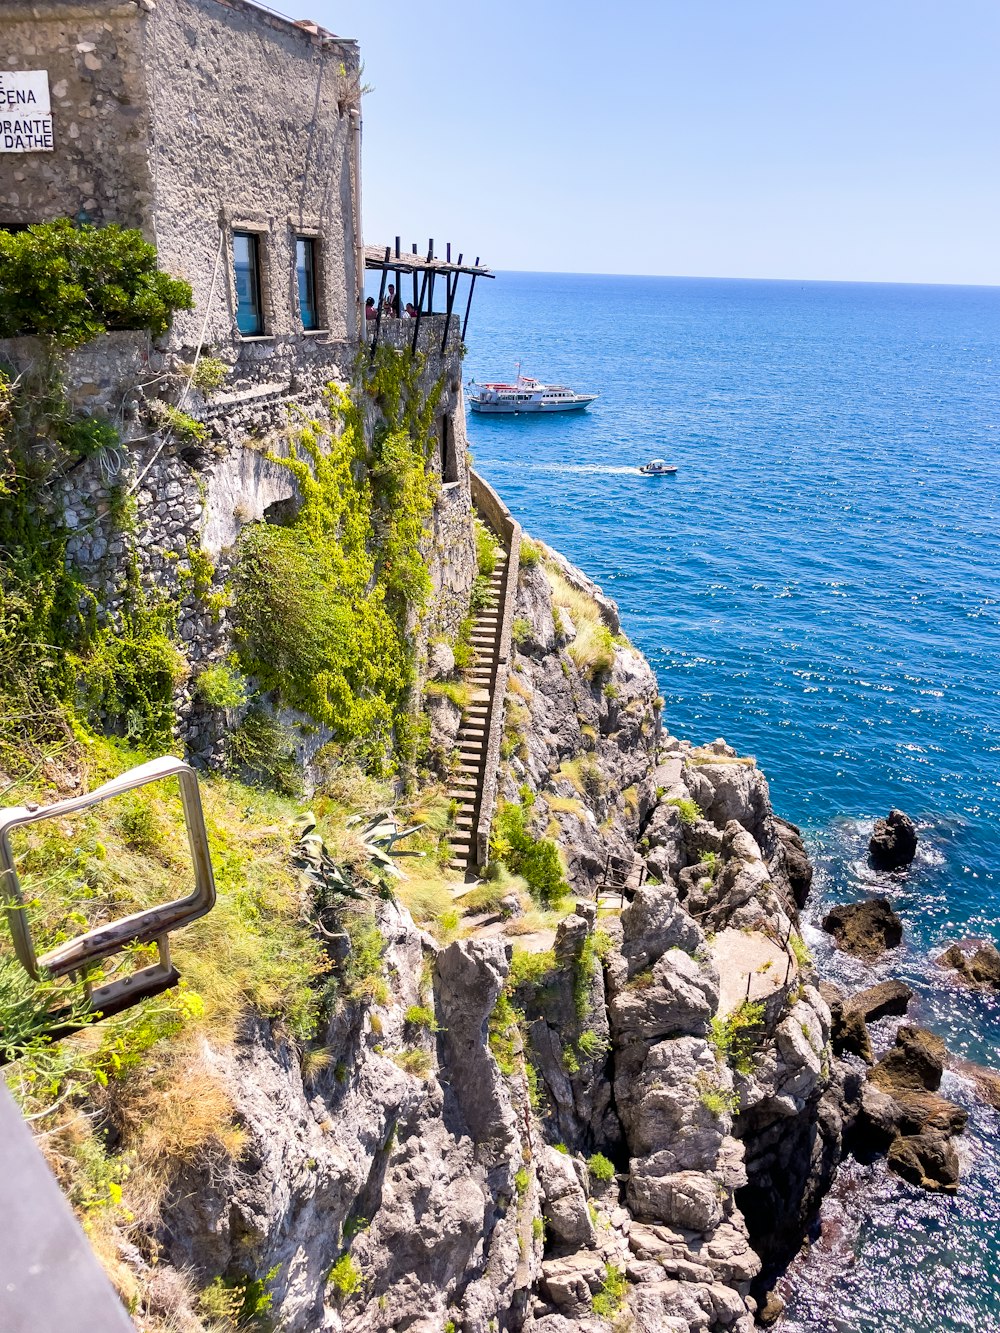 a stone building on the edge of a cliff next to the ocean